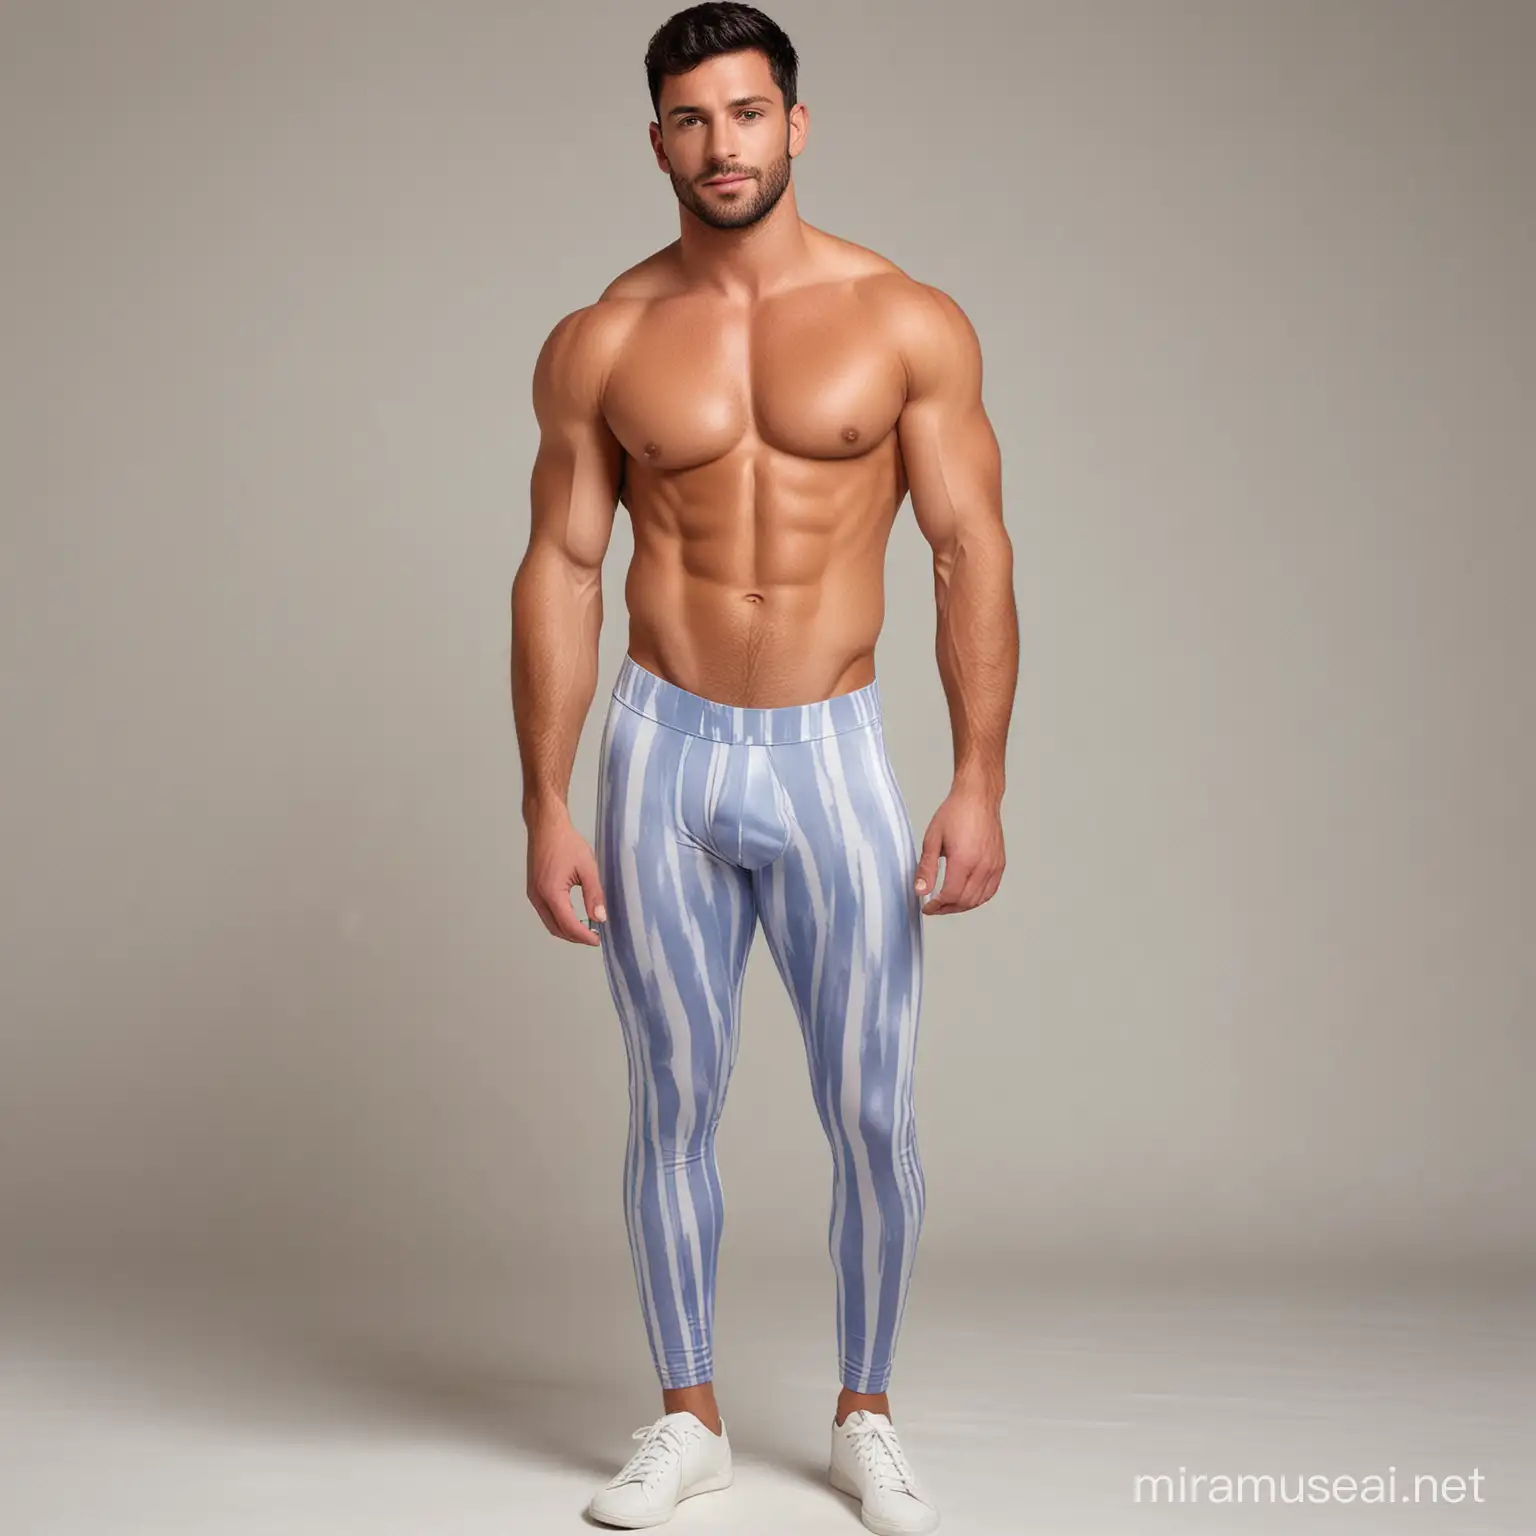 Charming shirtless muscular 28 year old male Argentine man, with short black hair, slight tanned skin; no-facial beard; wearing long periwinkle spandex leggings (with vertical white stripes),ñ